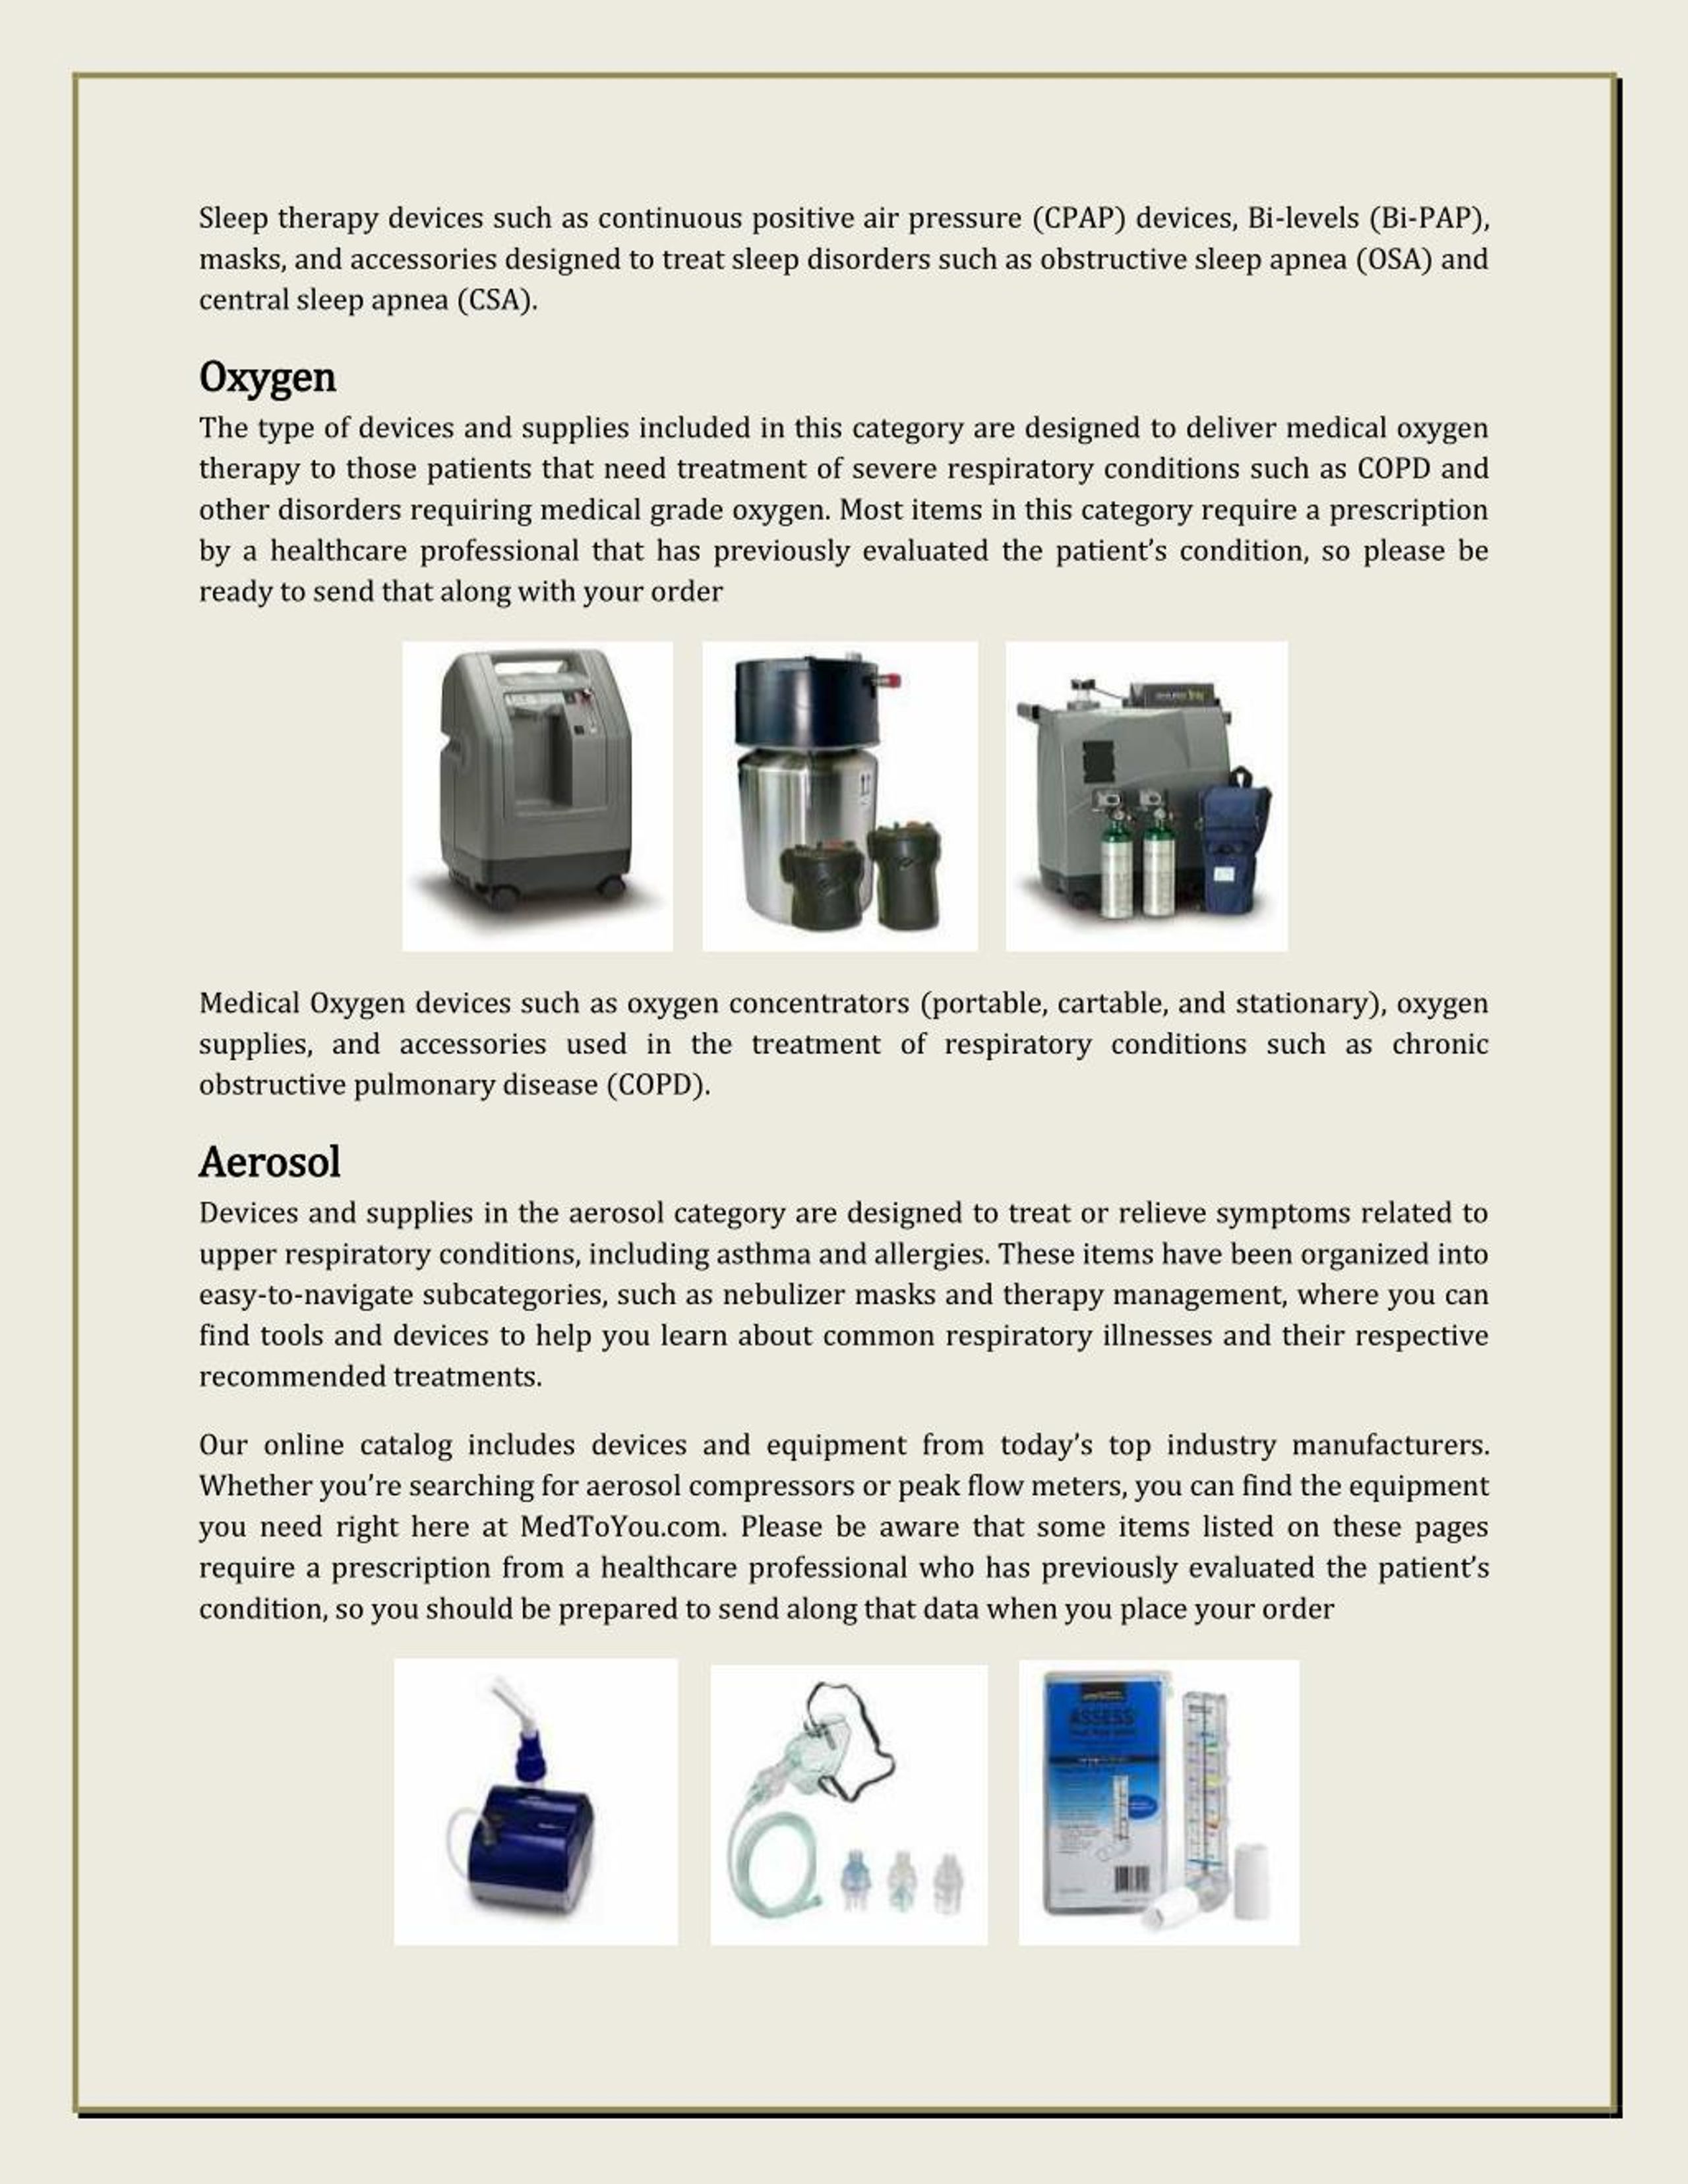 power point presentation on oxygen concentrator